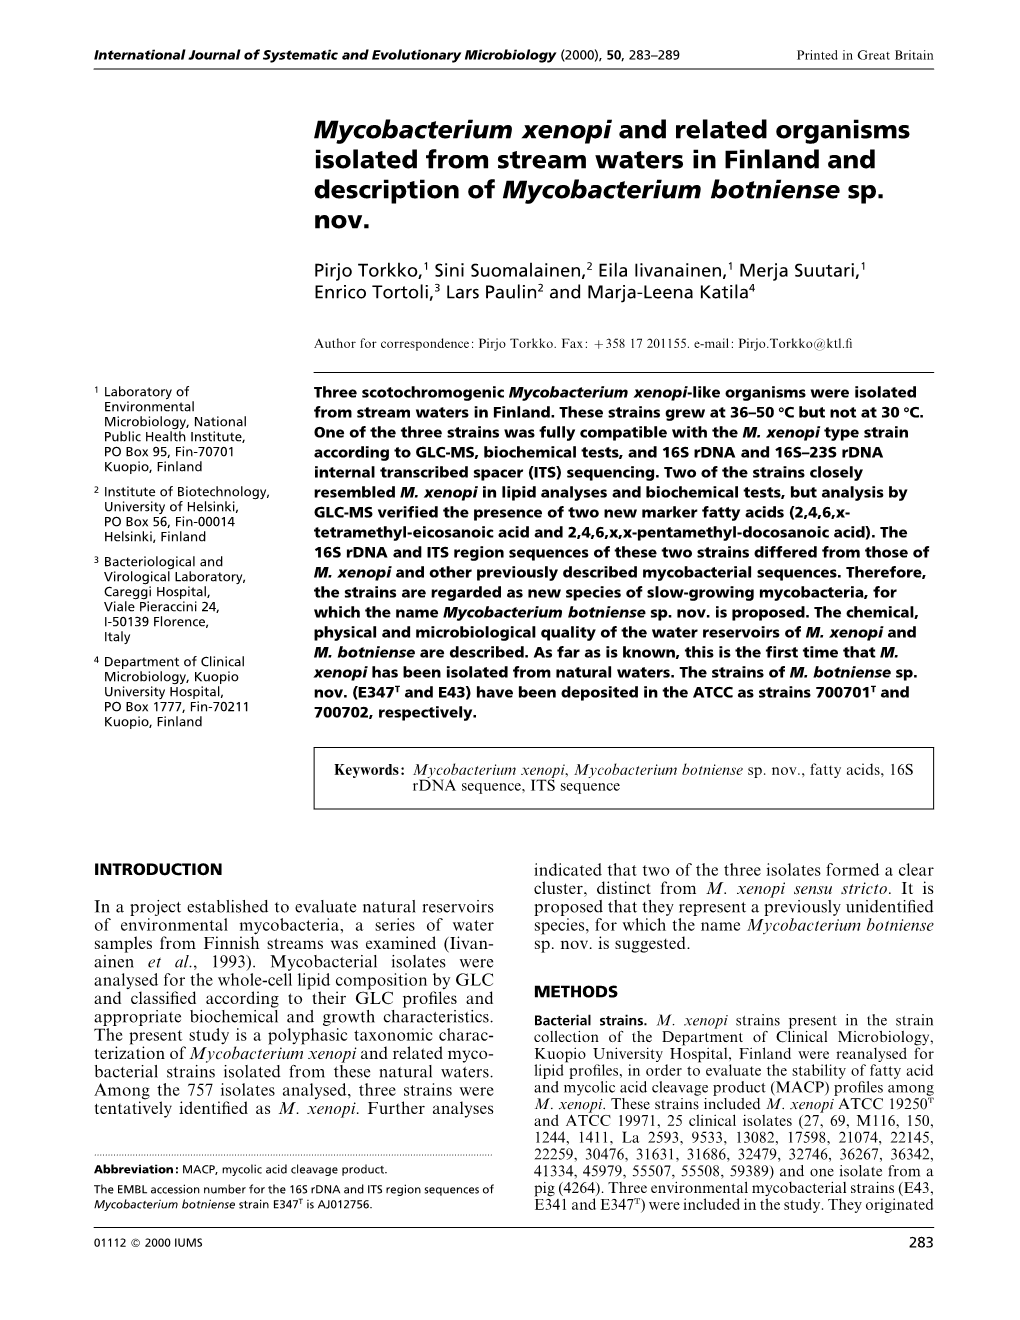 Mycobacterium Xenopi and Related Organisms Isolated from Stream Waters in Finland and Description of Mycobacterium Botniense Sp